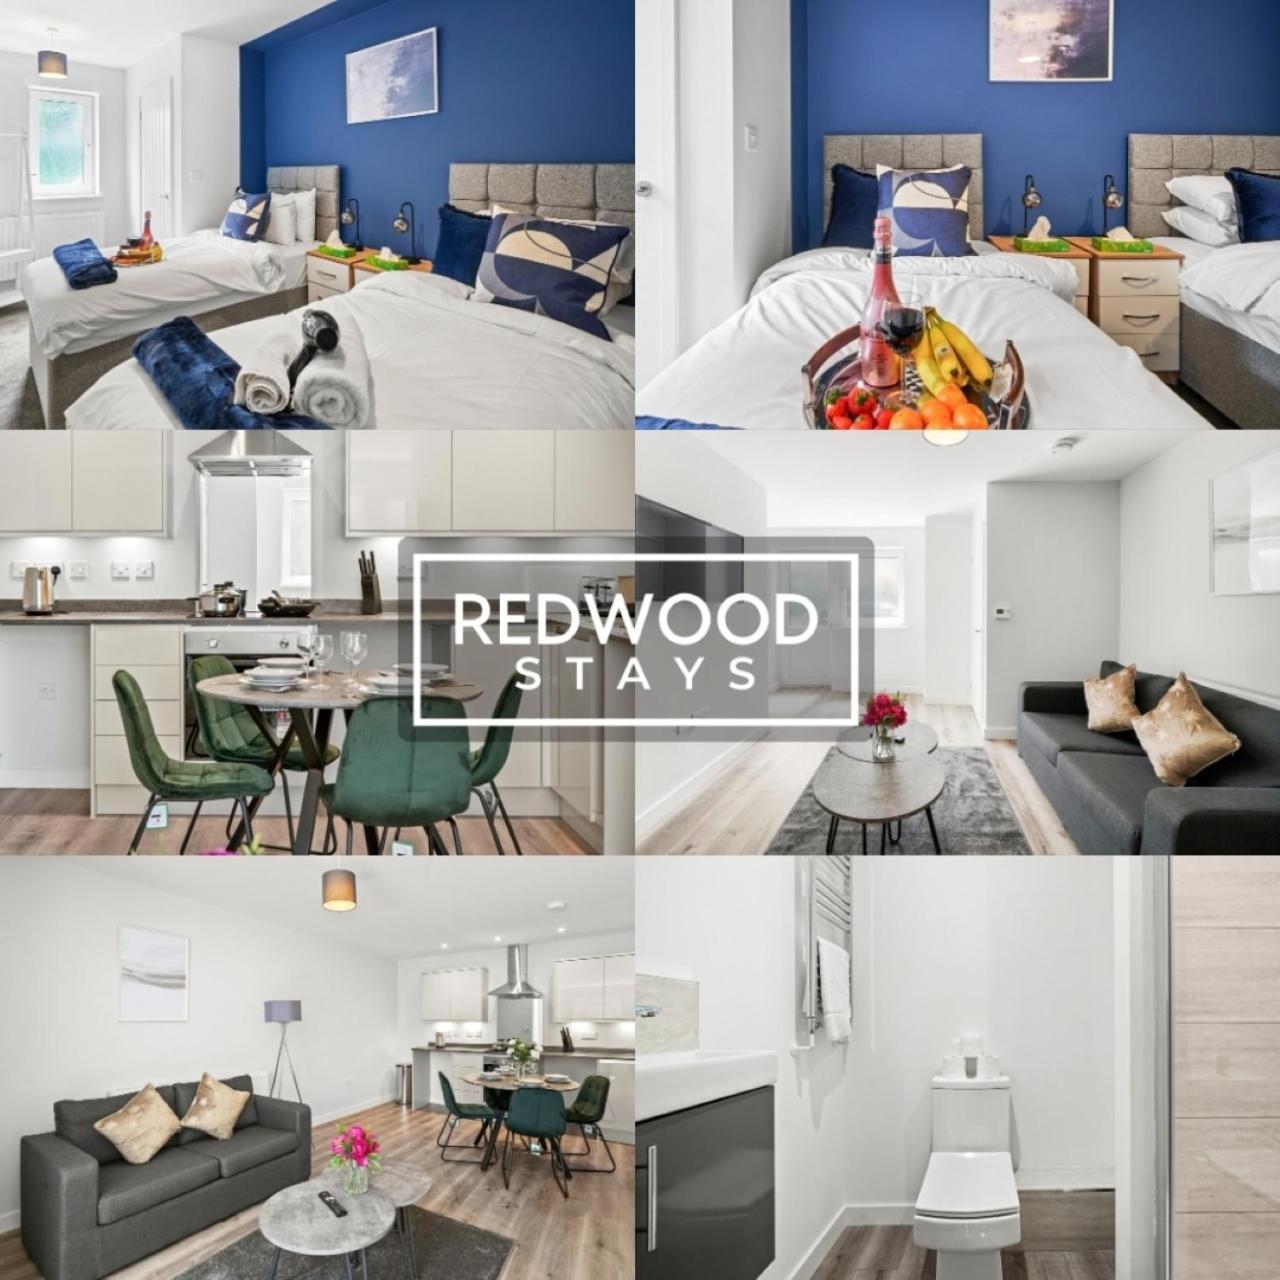 Quality 1 Bed 1 Bath Apartments For Contractors By Redwood Stays 法恩伯勒 外观 照片